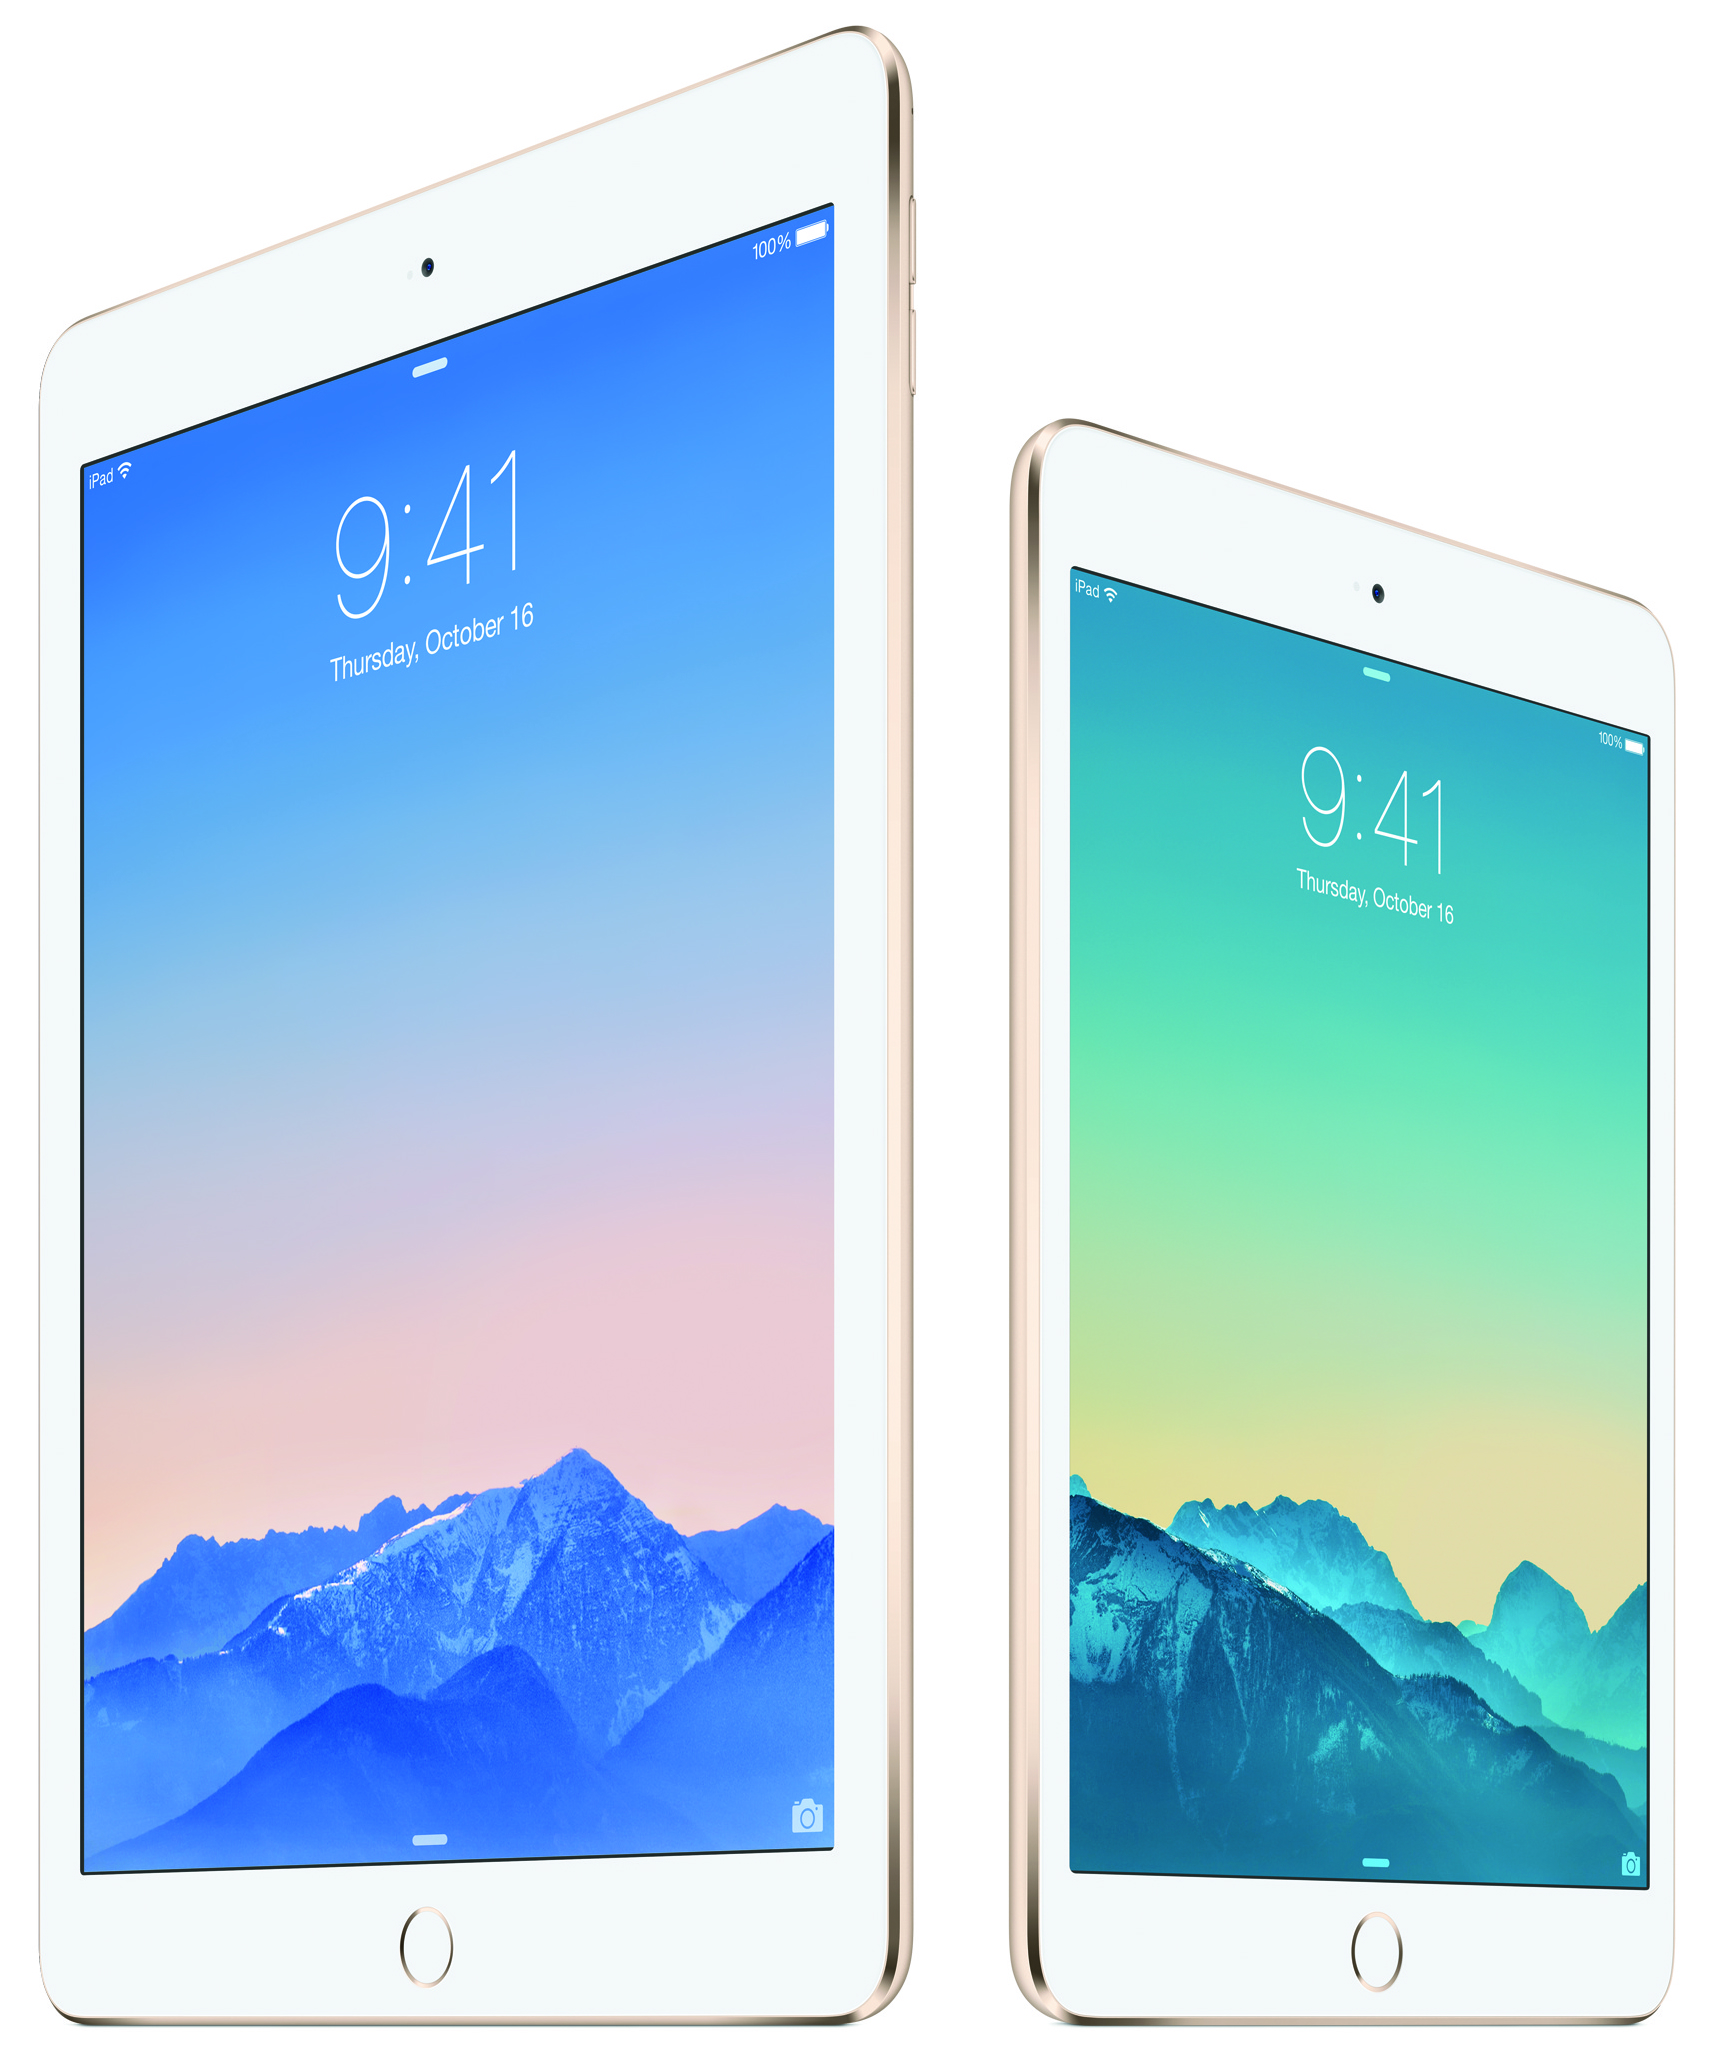 Apple's iPad Air 2 and iPad mini 3 to Go on Sale in China Imminently